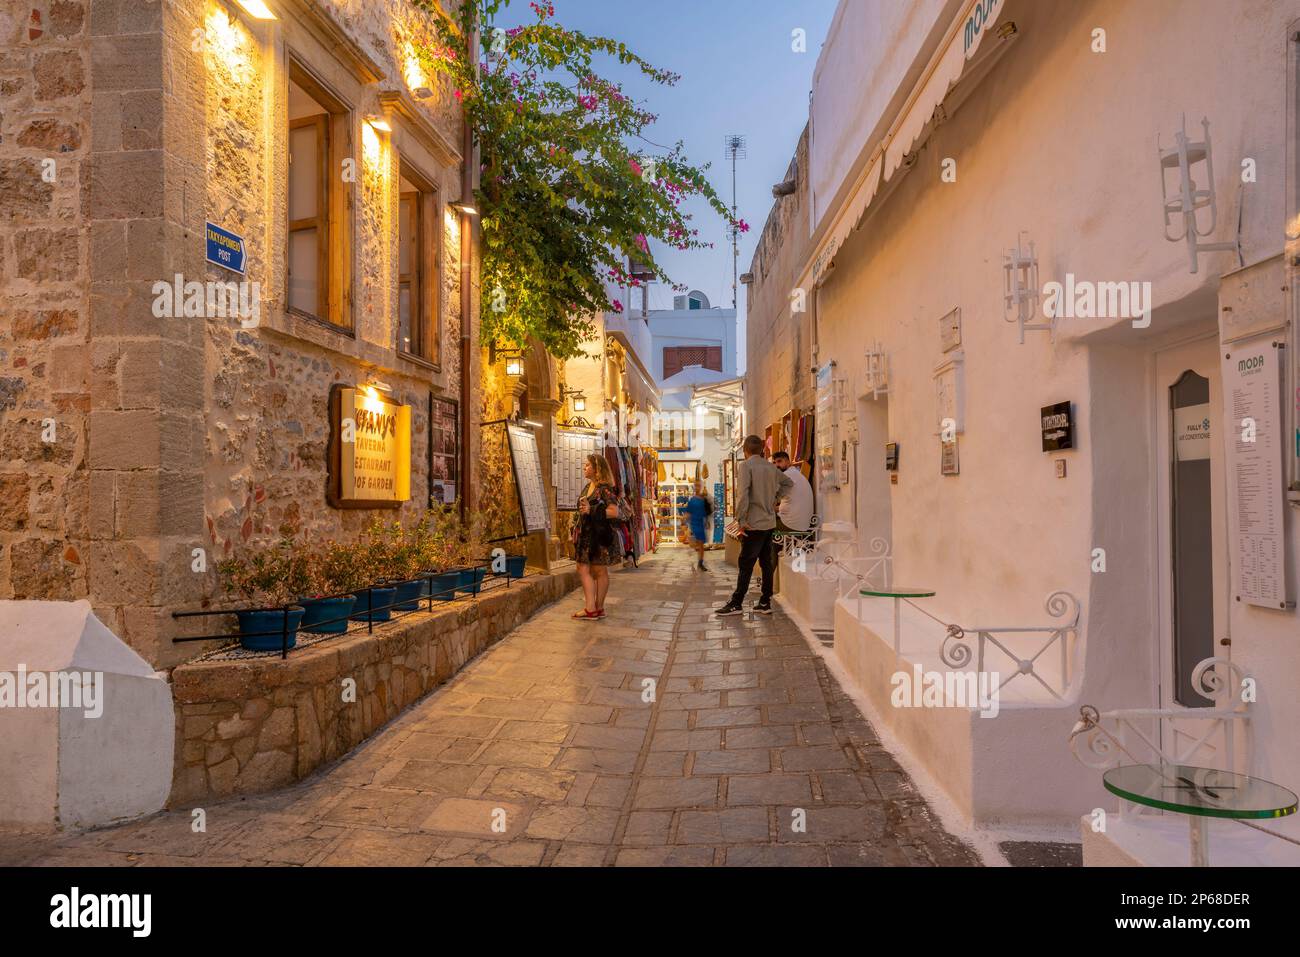 View of bar in Lindos street at dusk, Lindos, Rhodes, Dodecanese Island Group, Greek Islands, Greece, Europe Stock Photo